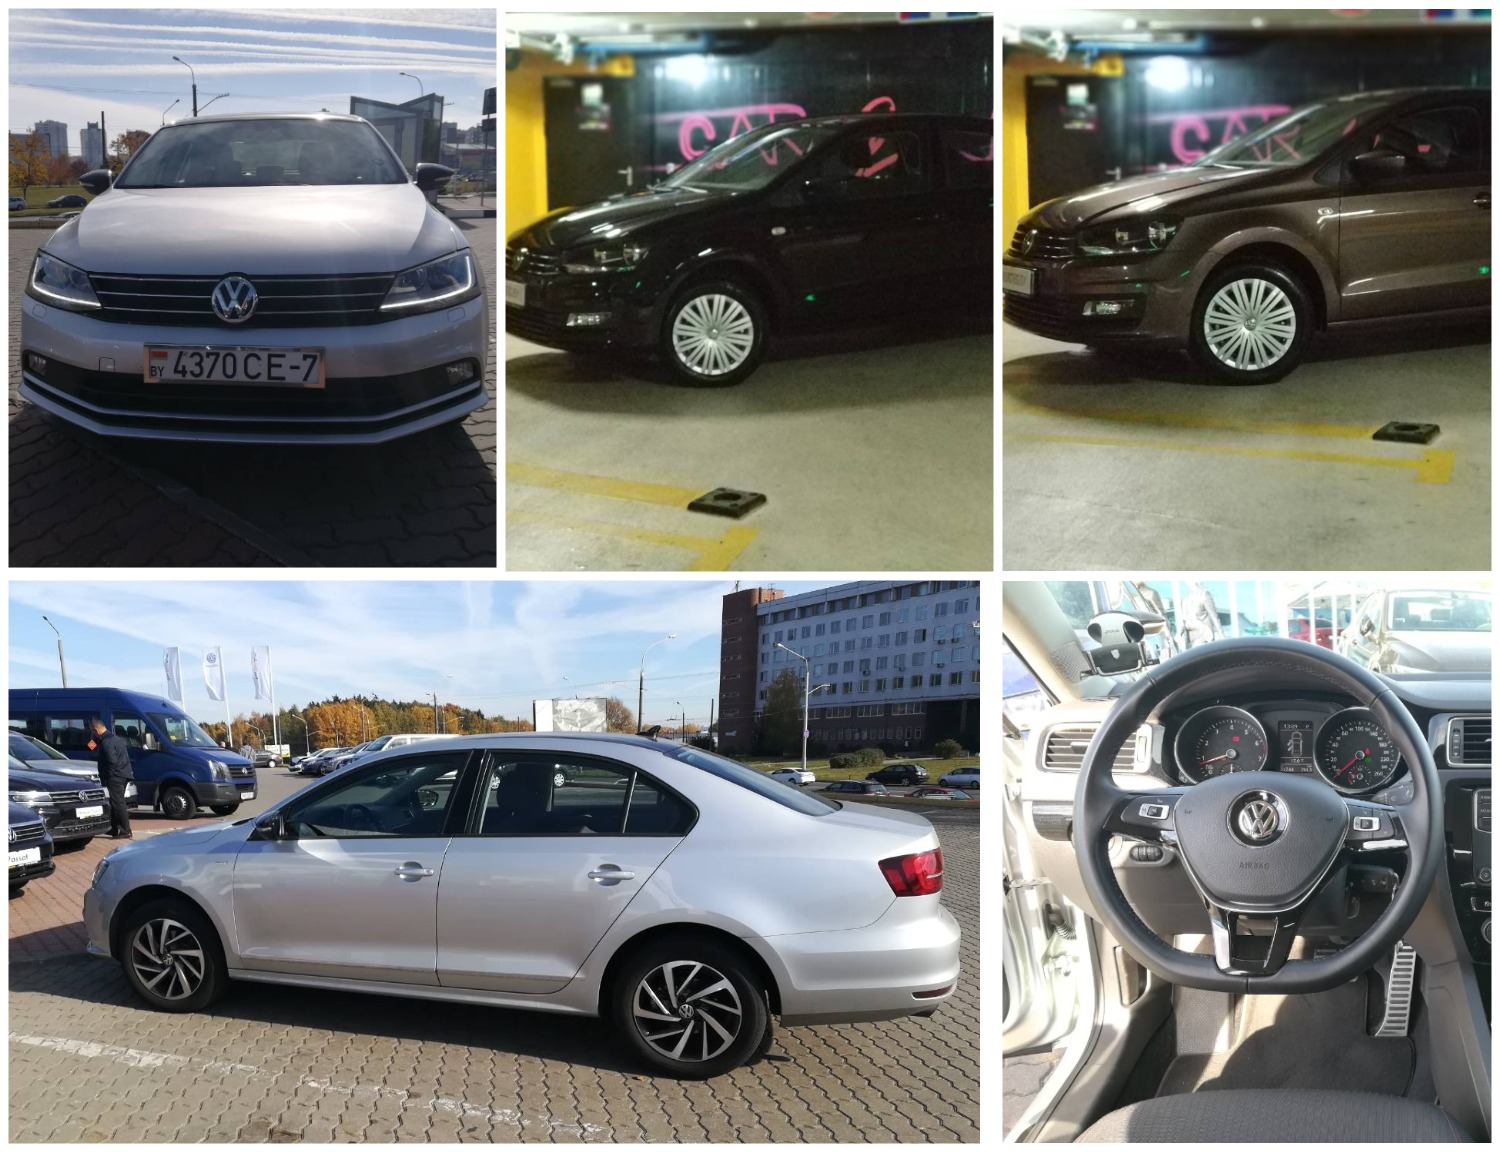 AvtoLimo Company propose rental car service in Minsk and Belarus cities.